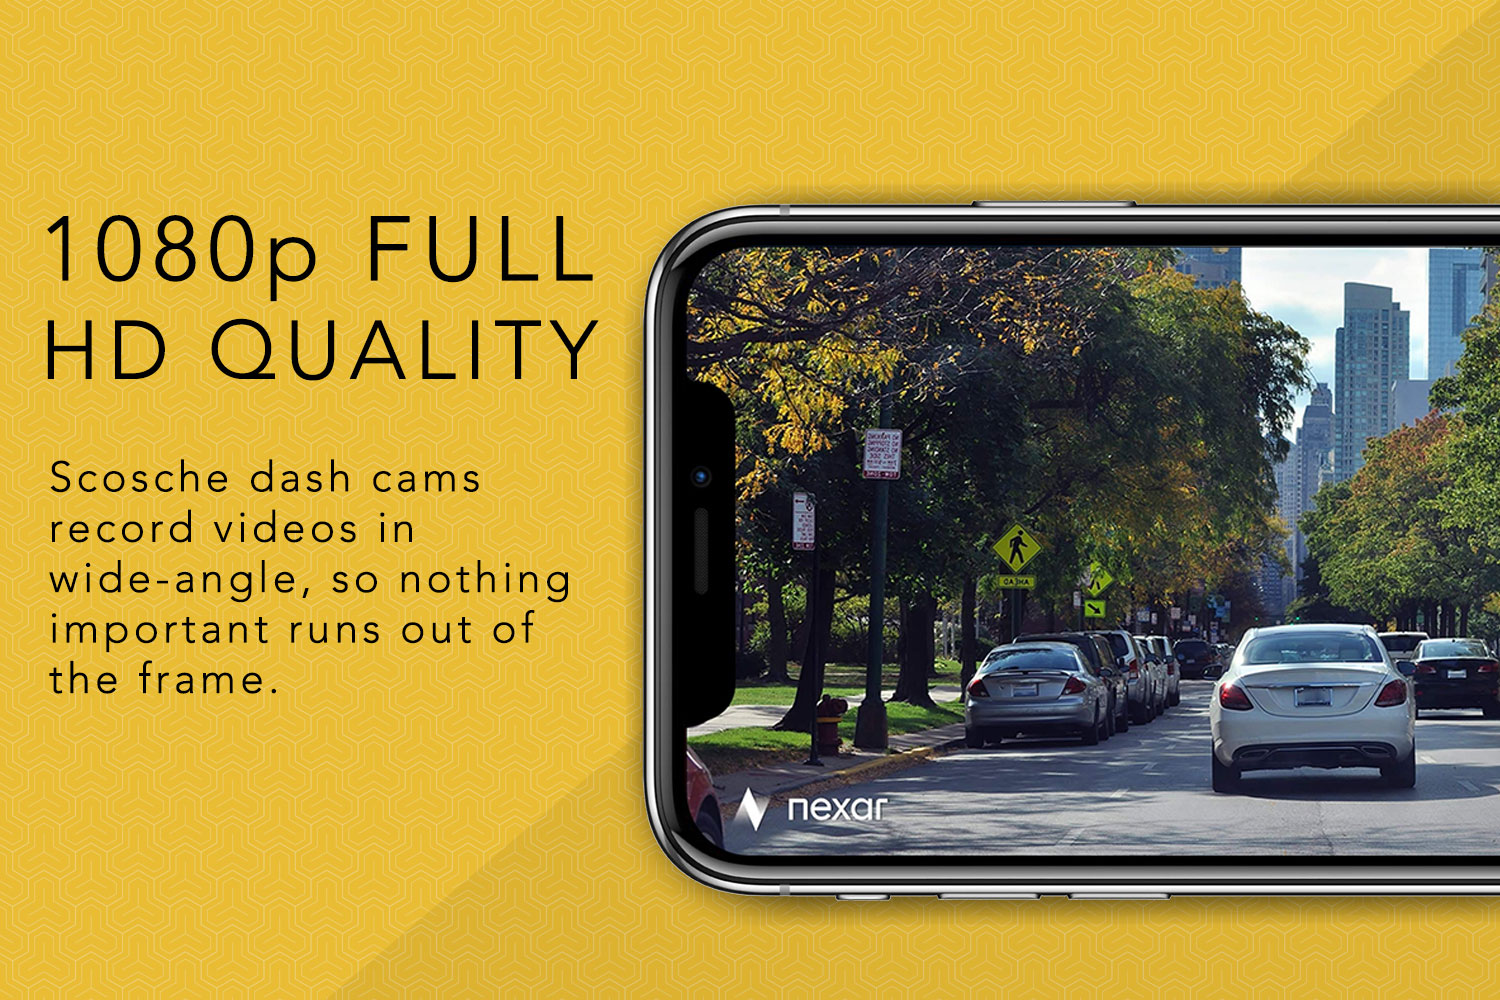 1080p Full HD Quality, Scosche dash cams record videos in wide-angle, so nothing important runs out of the frame.